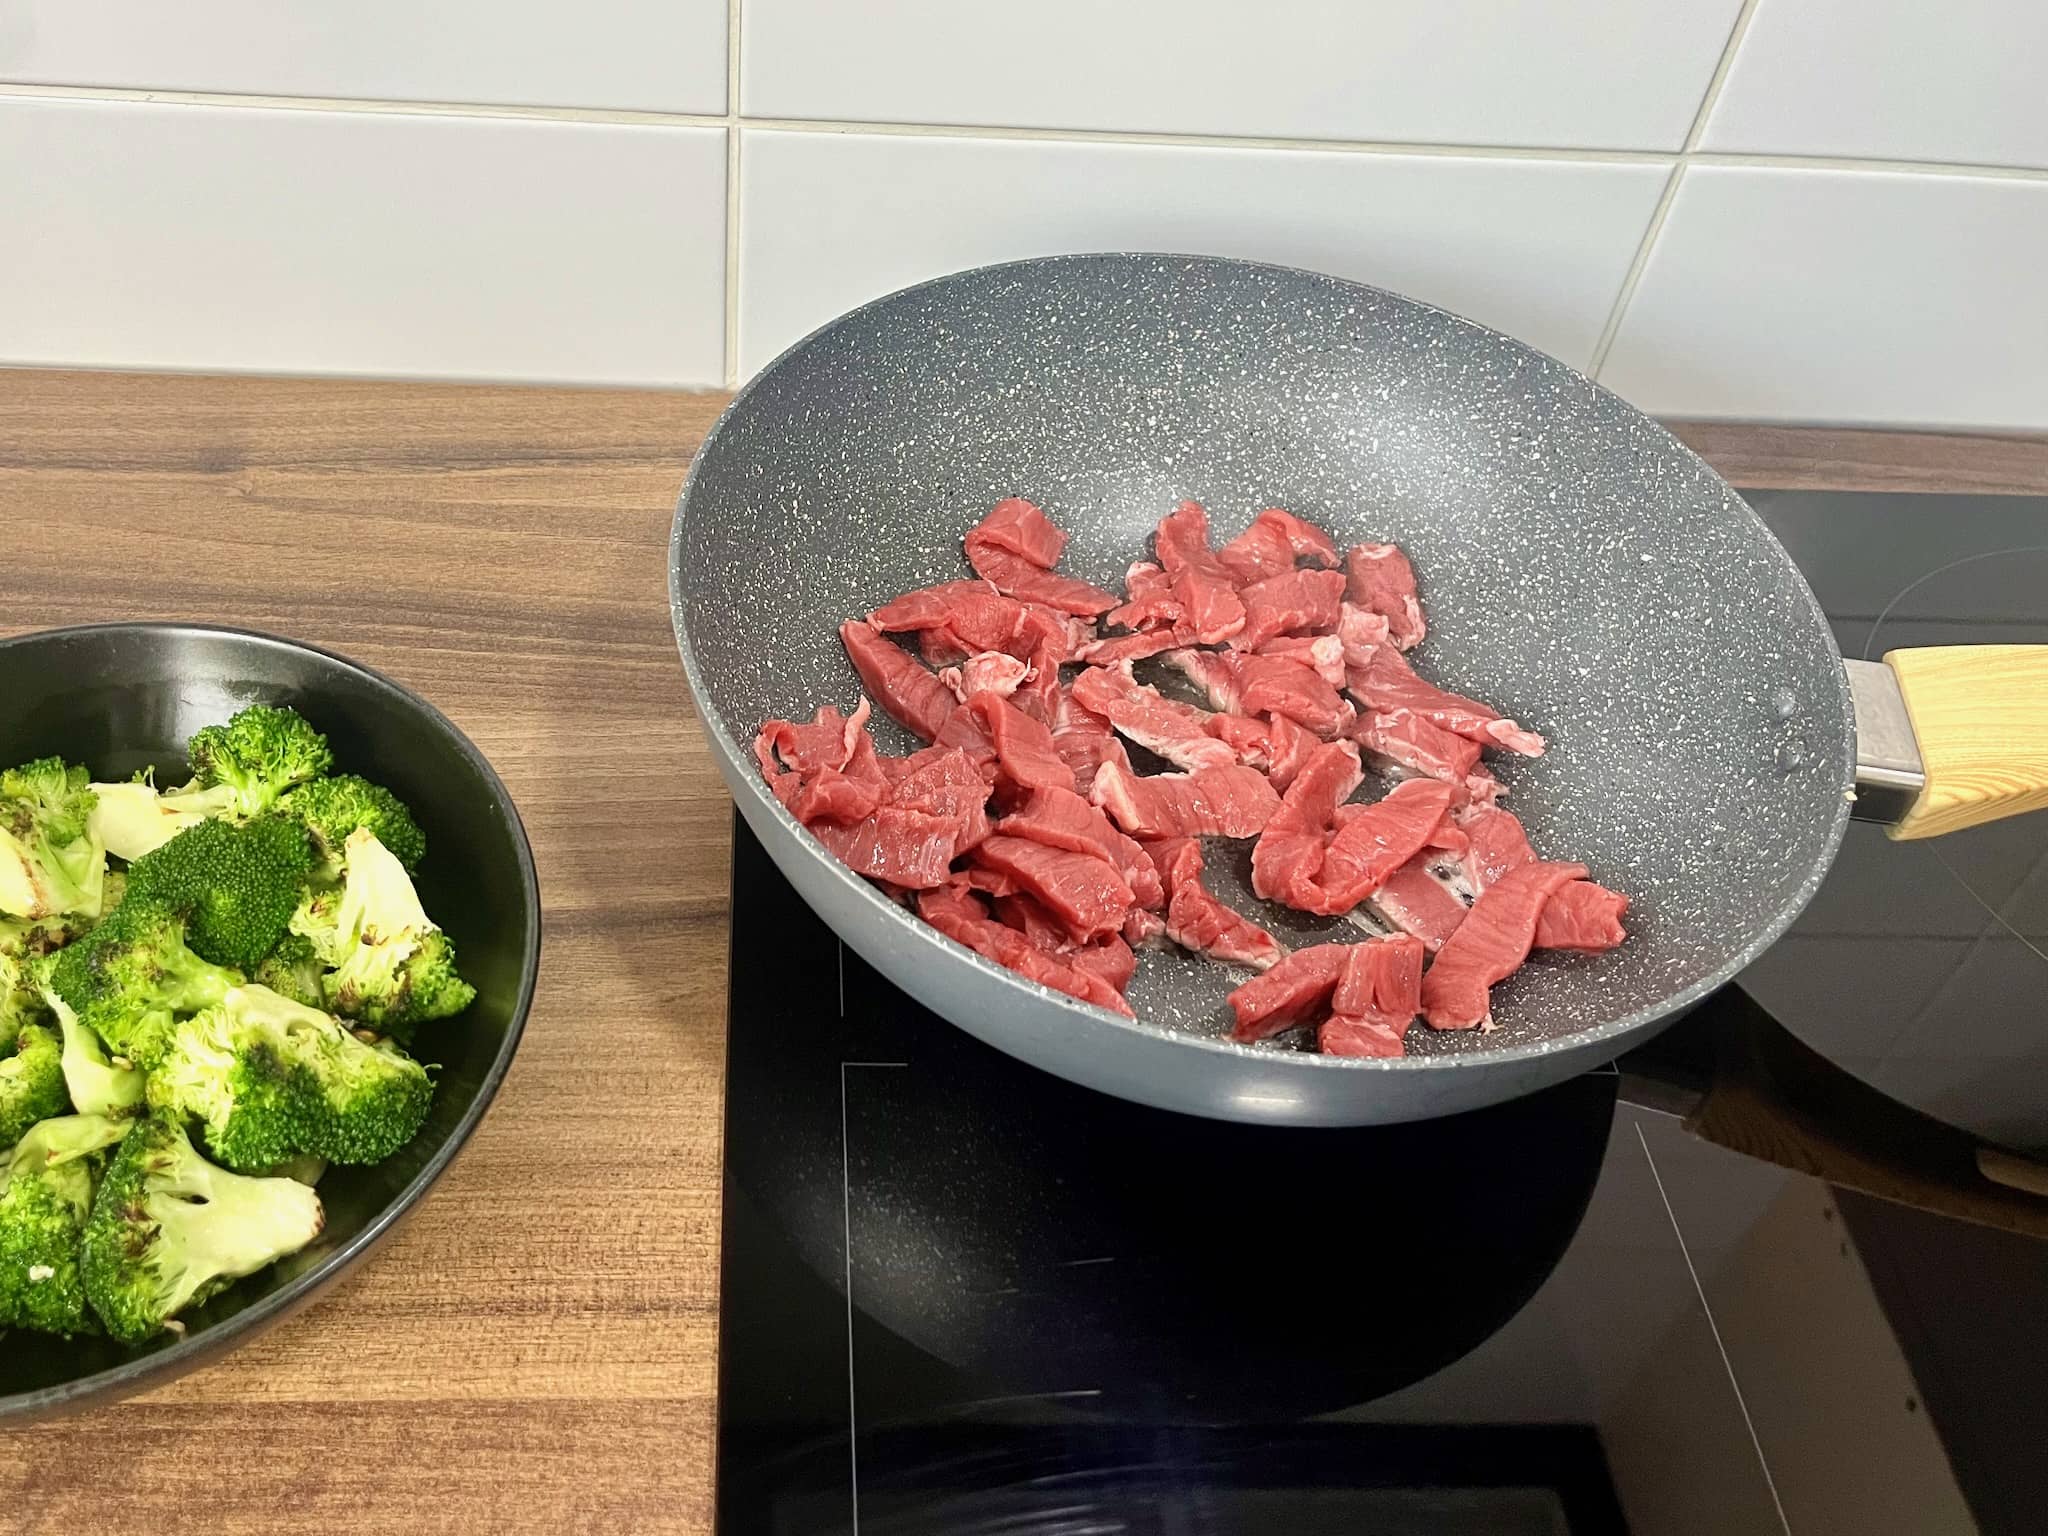 Beef slices frying in a pan with broccoli florets in a bowl on the side